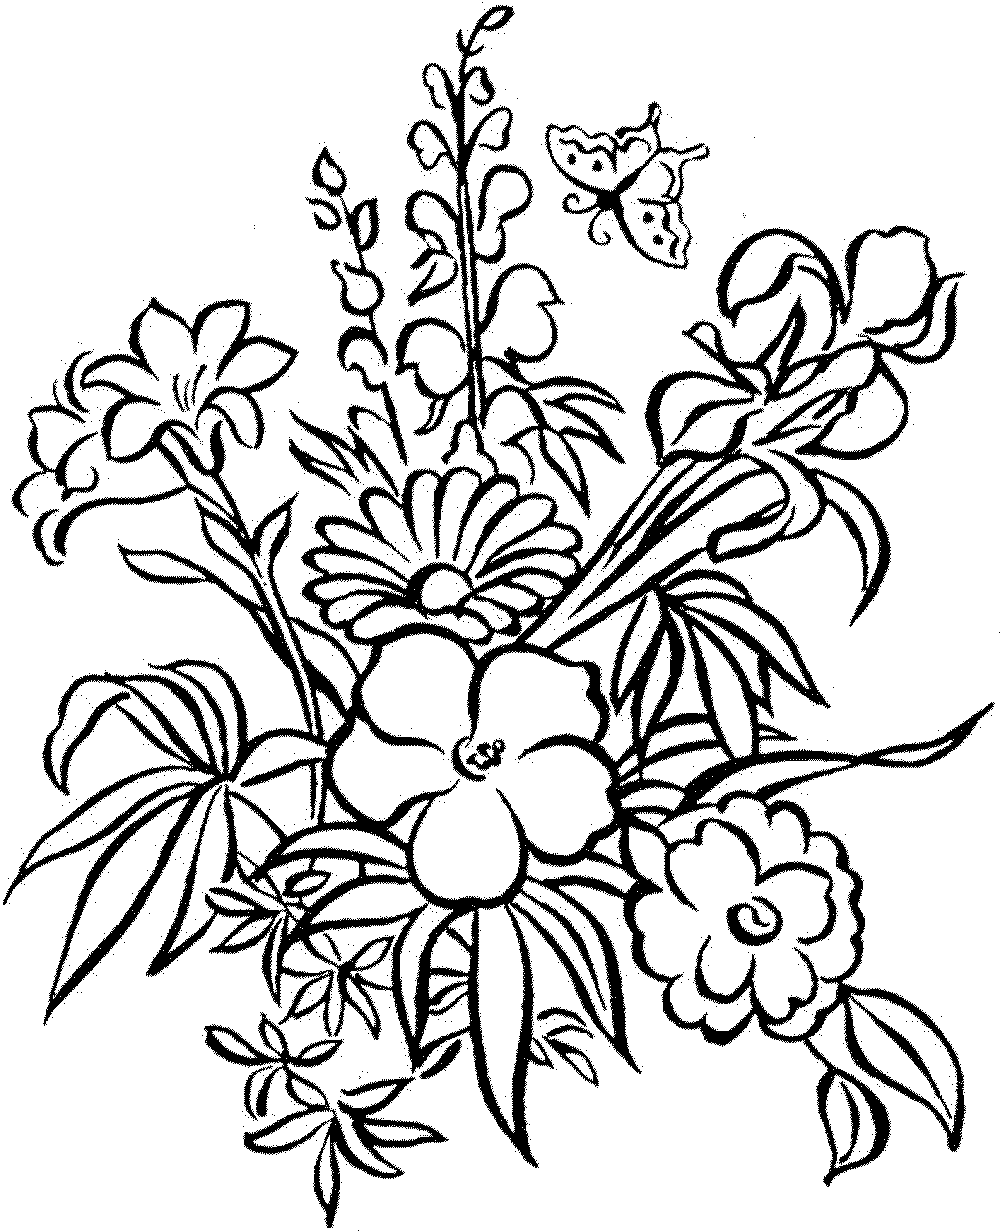 detailed flower coloring pages detailed flower coloring pages to download and print for free detailed coloring flower pages 